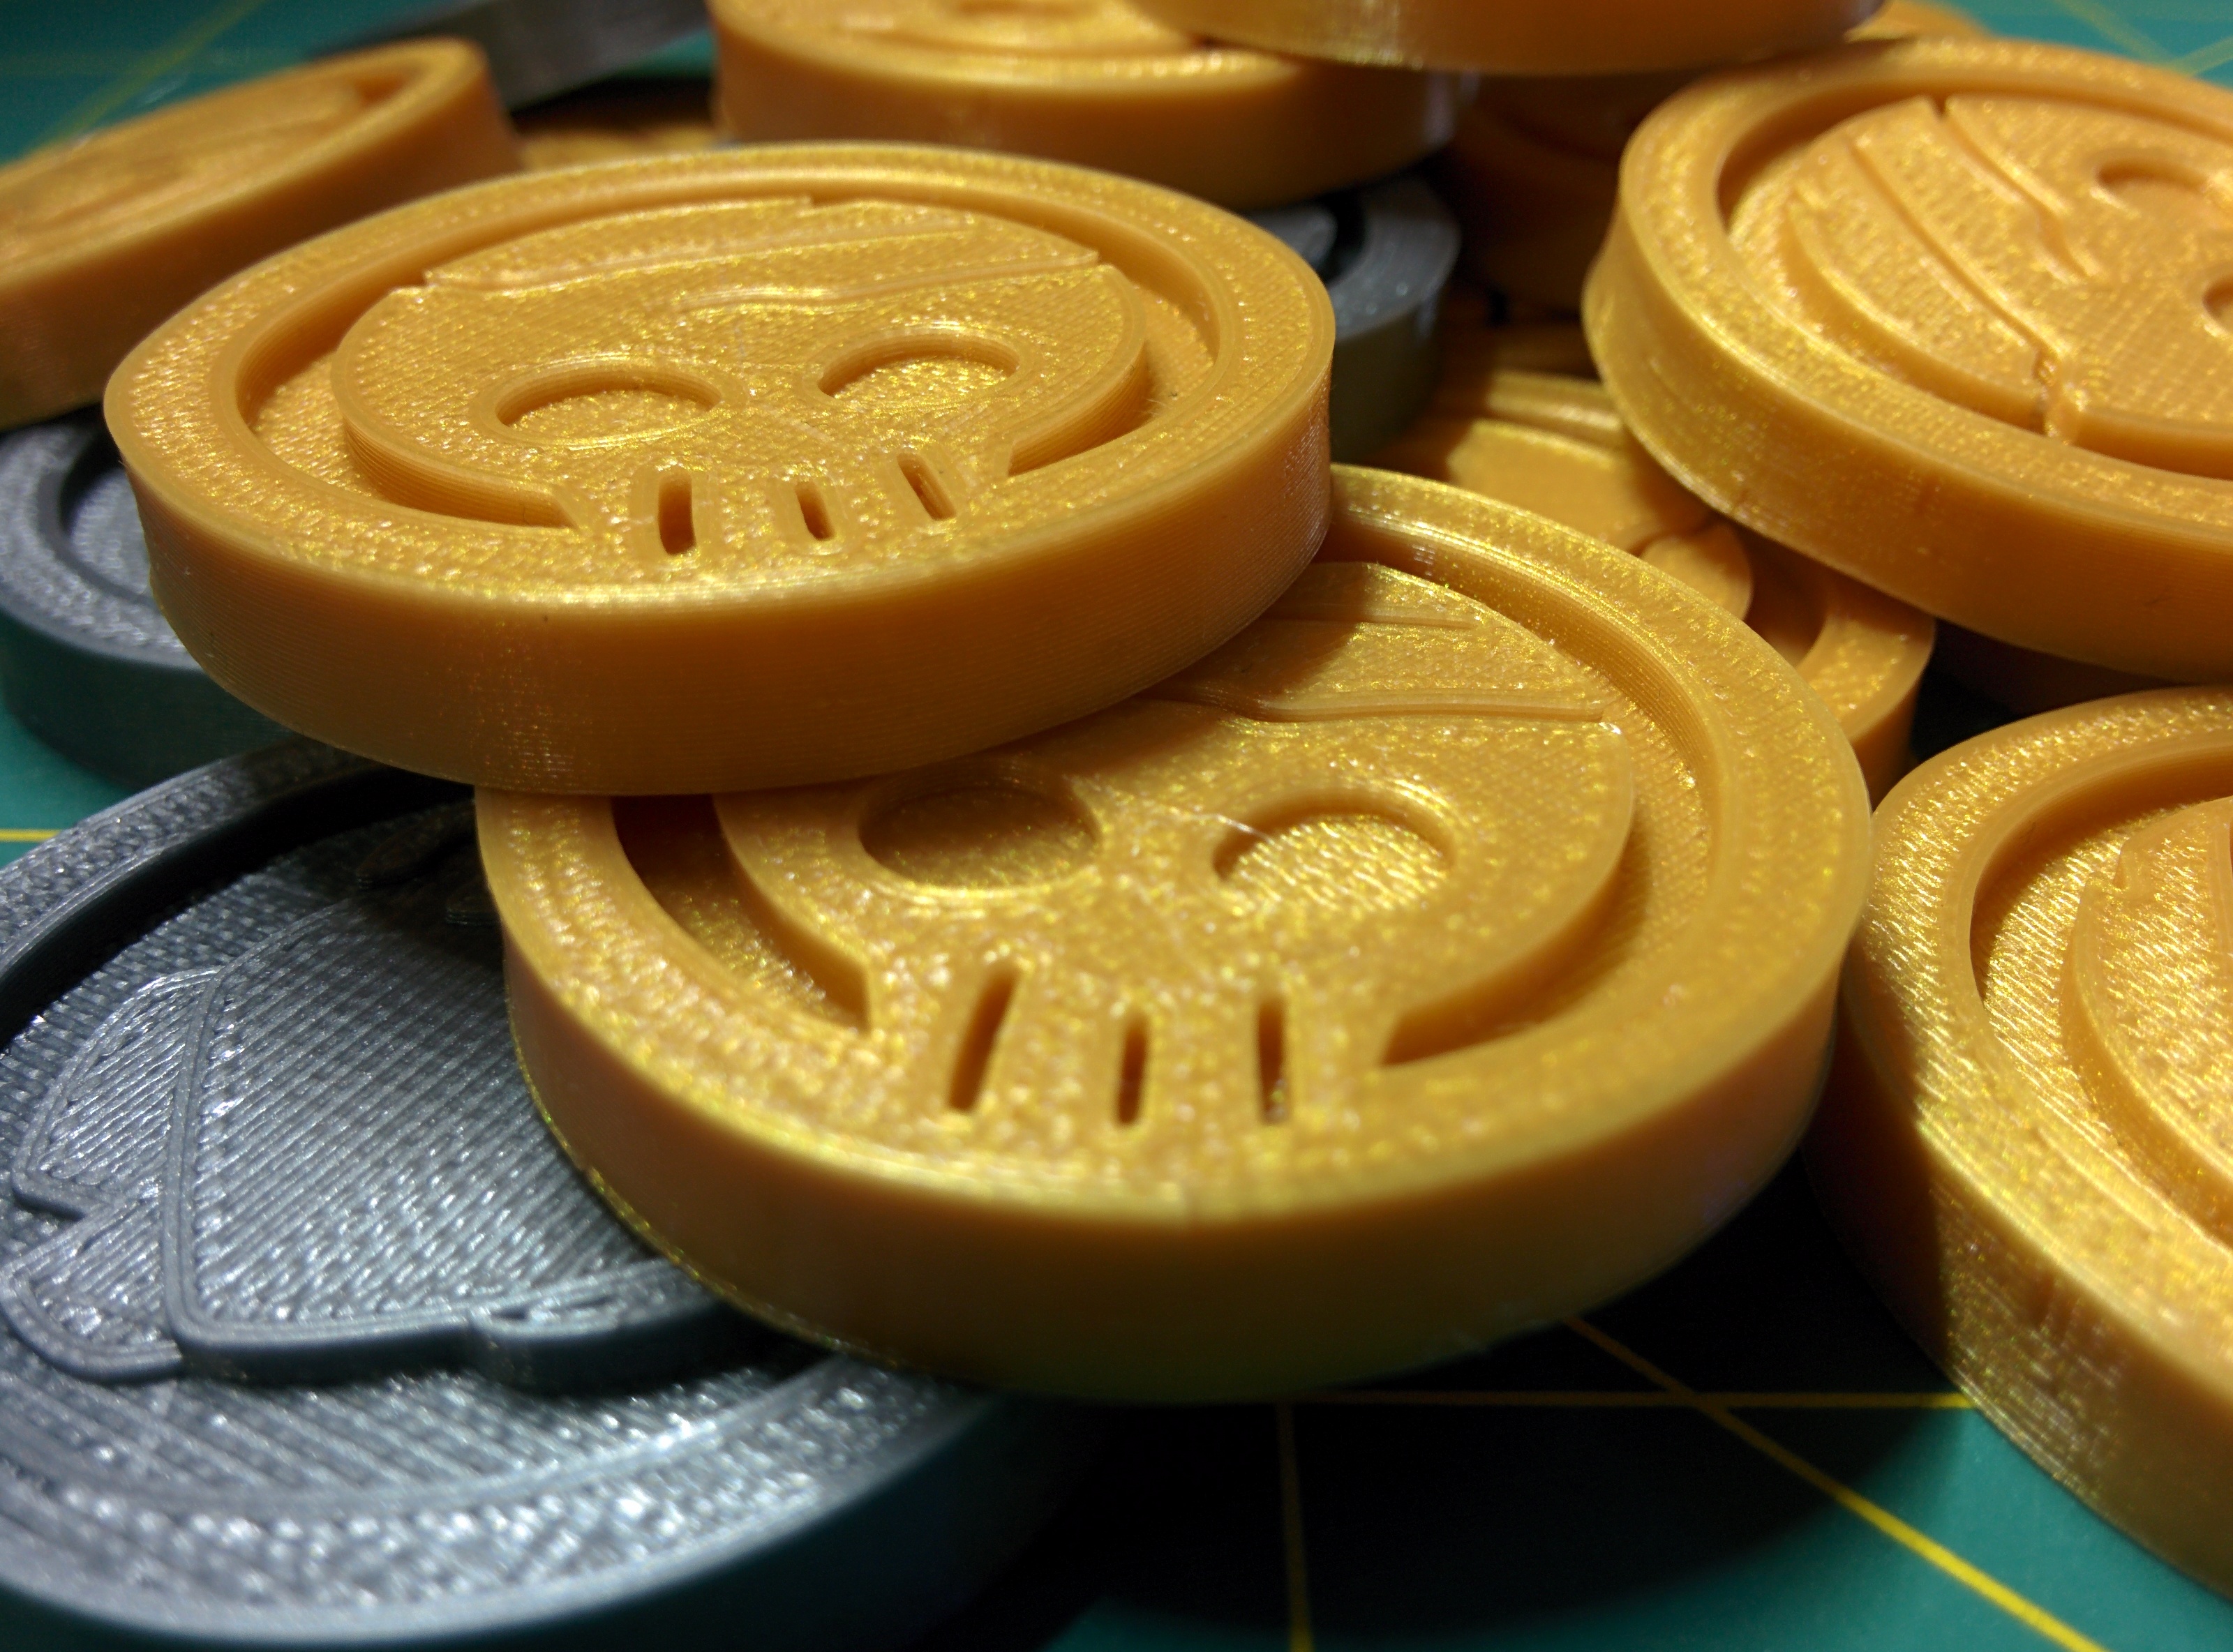 3D-Printed Schwag Preview!